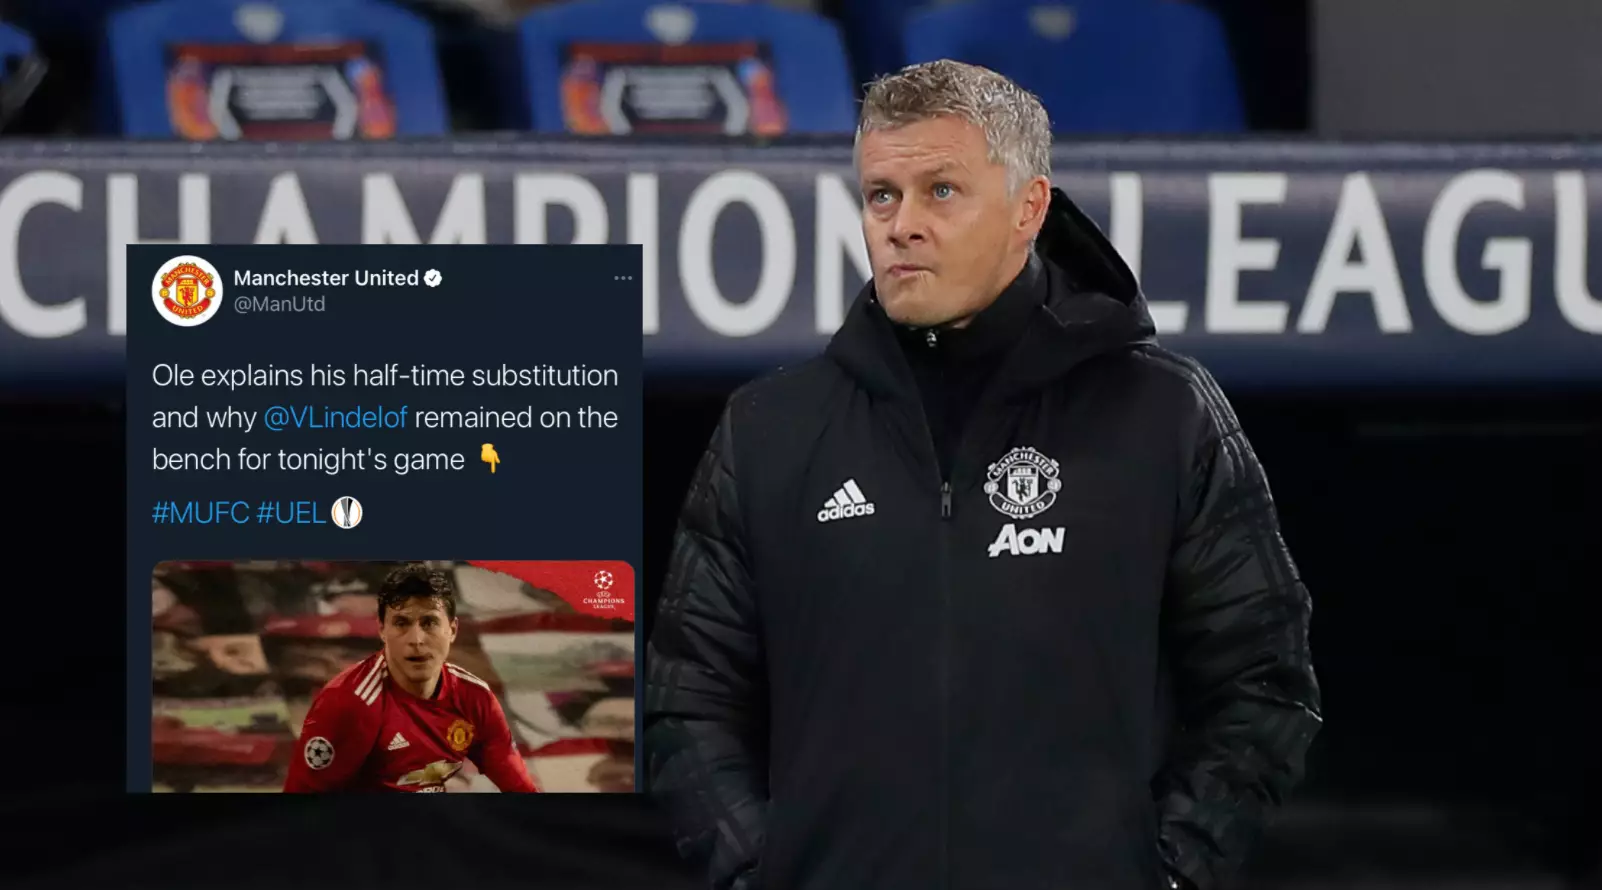 Manchester United Use The Europa League Hashtag By Accident In Deleted Twitter Post 